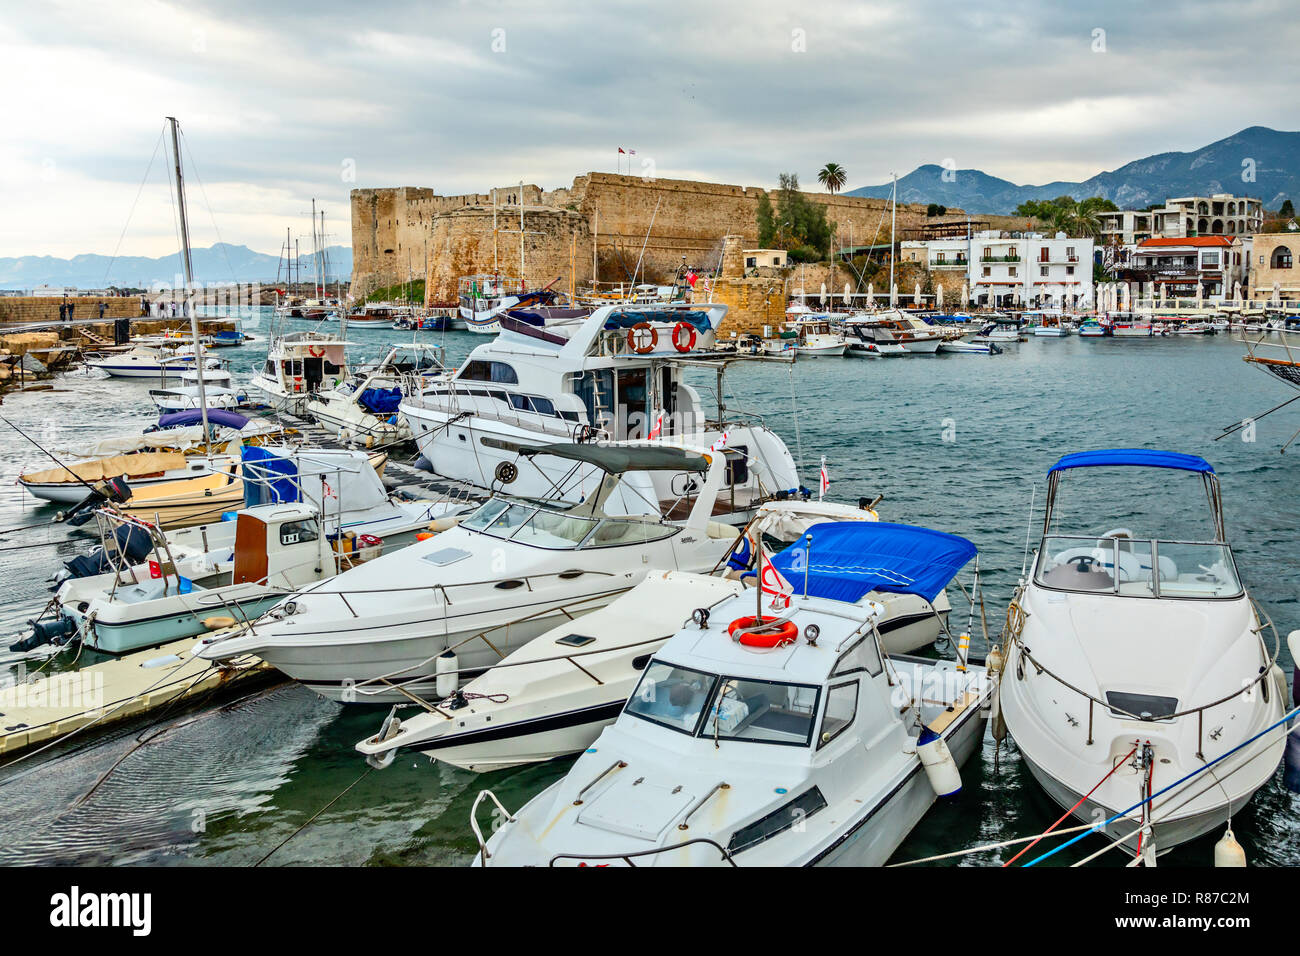 Kyrenia or Girne  historical city center, view to marina with many yachts and boats with Venetian castle and mountains in the background, North Cyprus Stock Photo